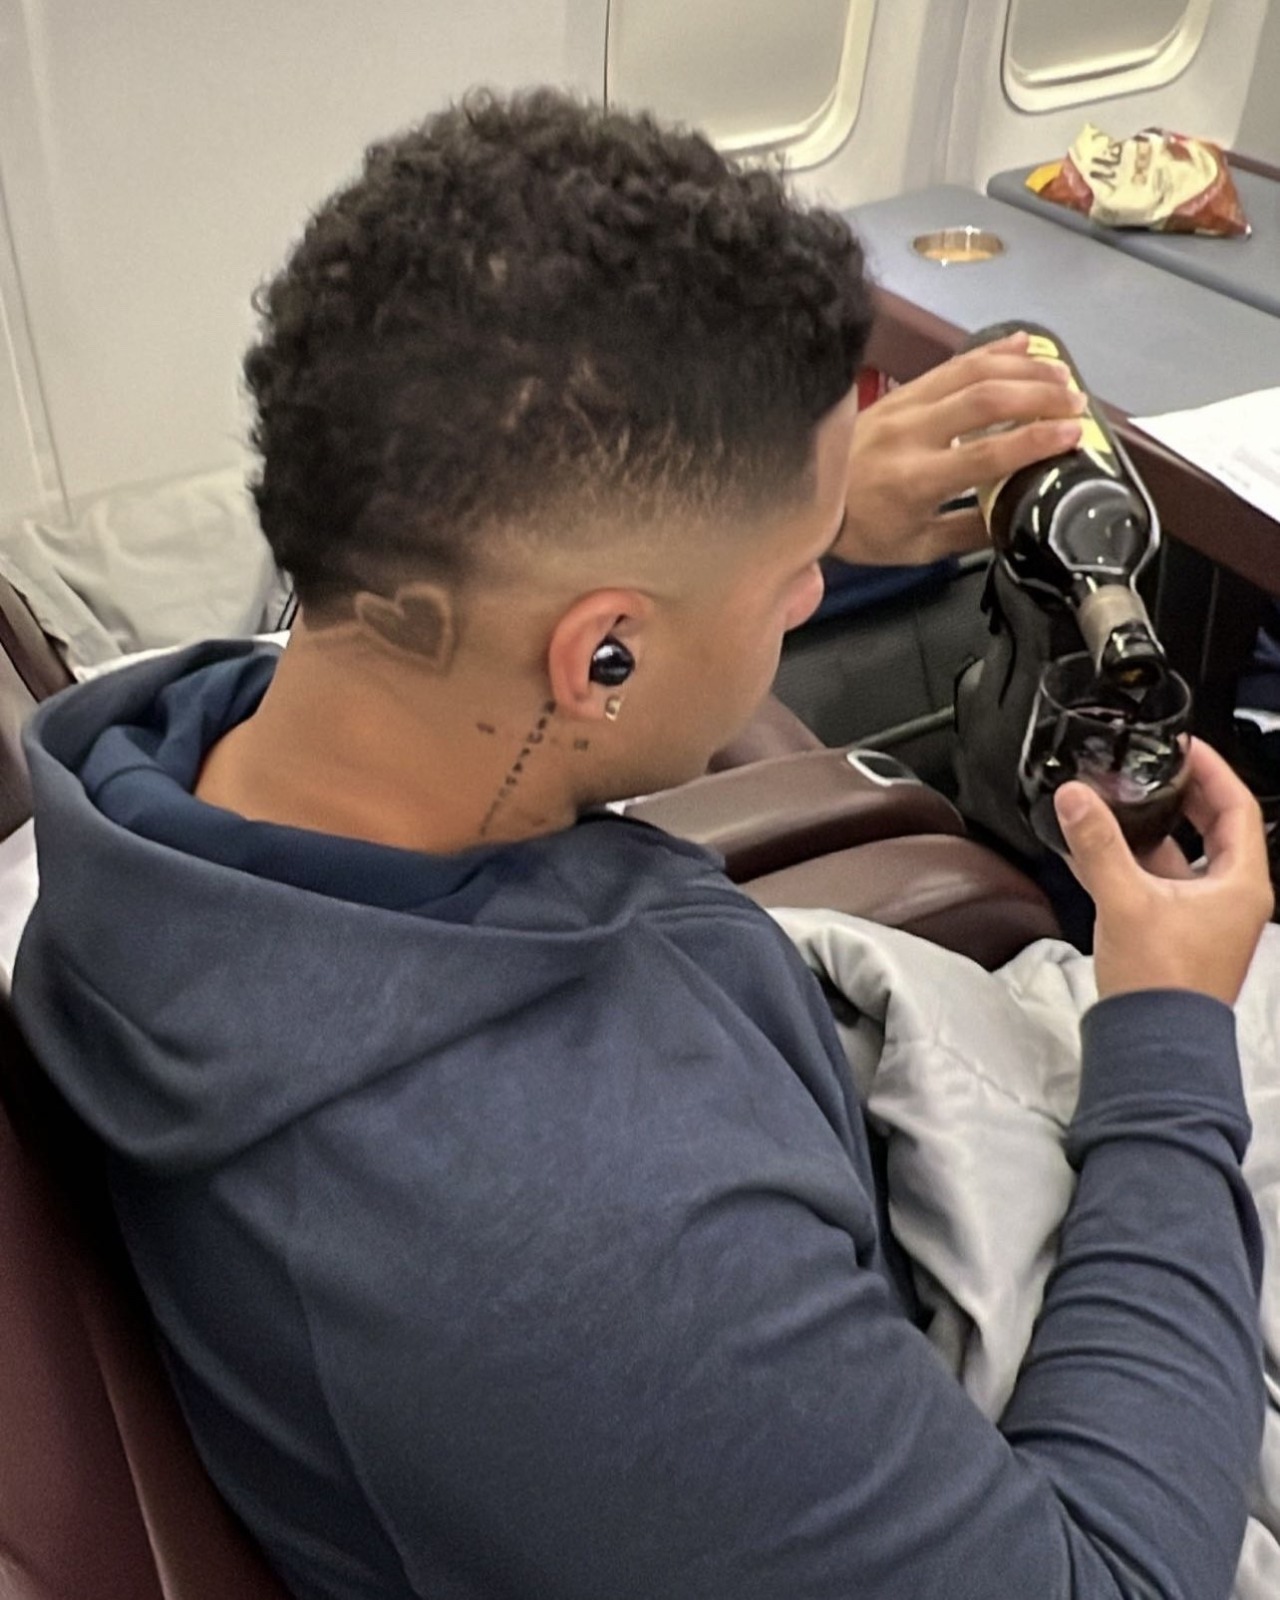 𓆏 — gleyber has a heart shaved into his hair 🥺